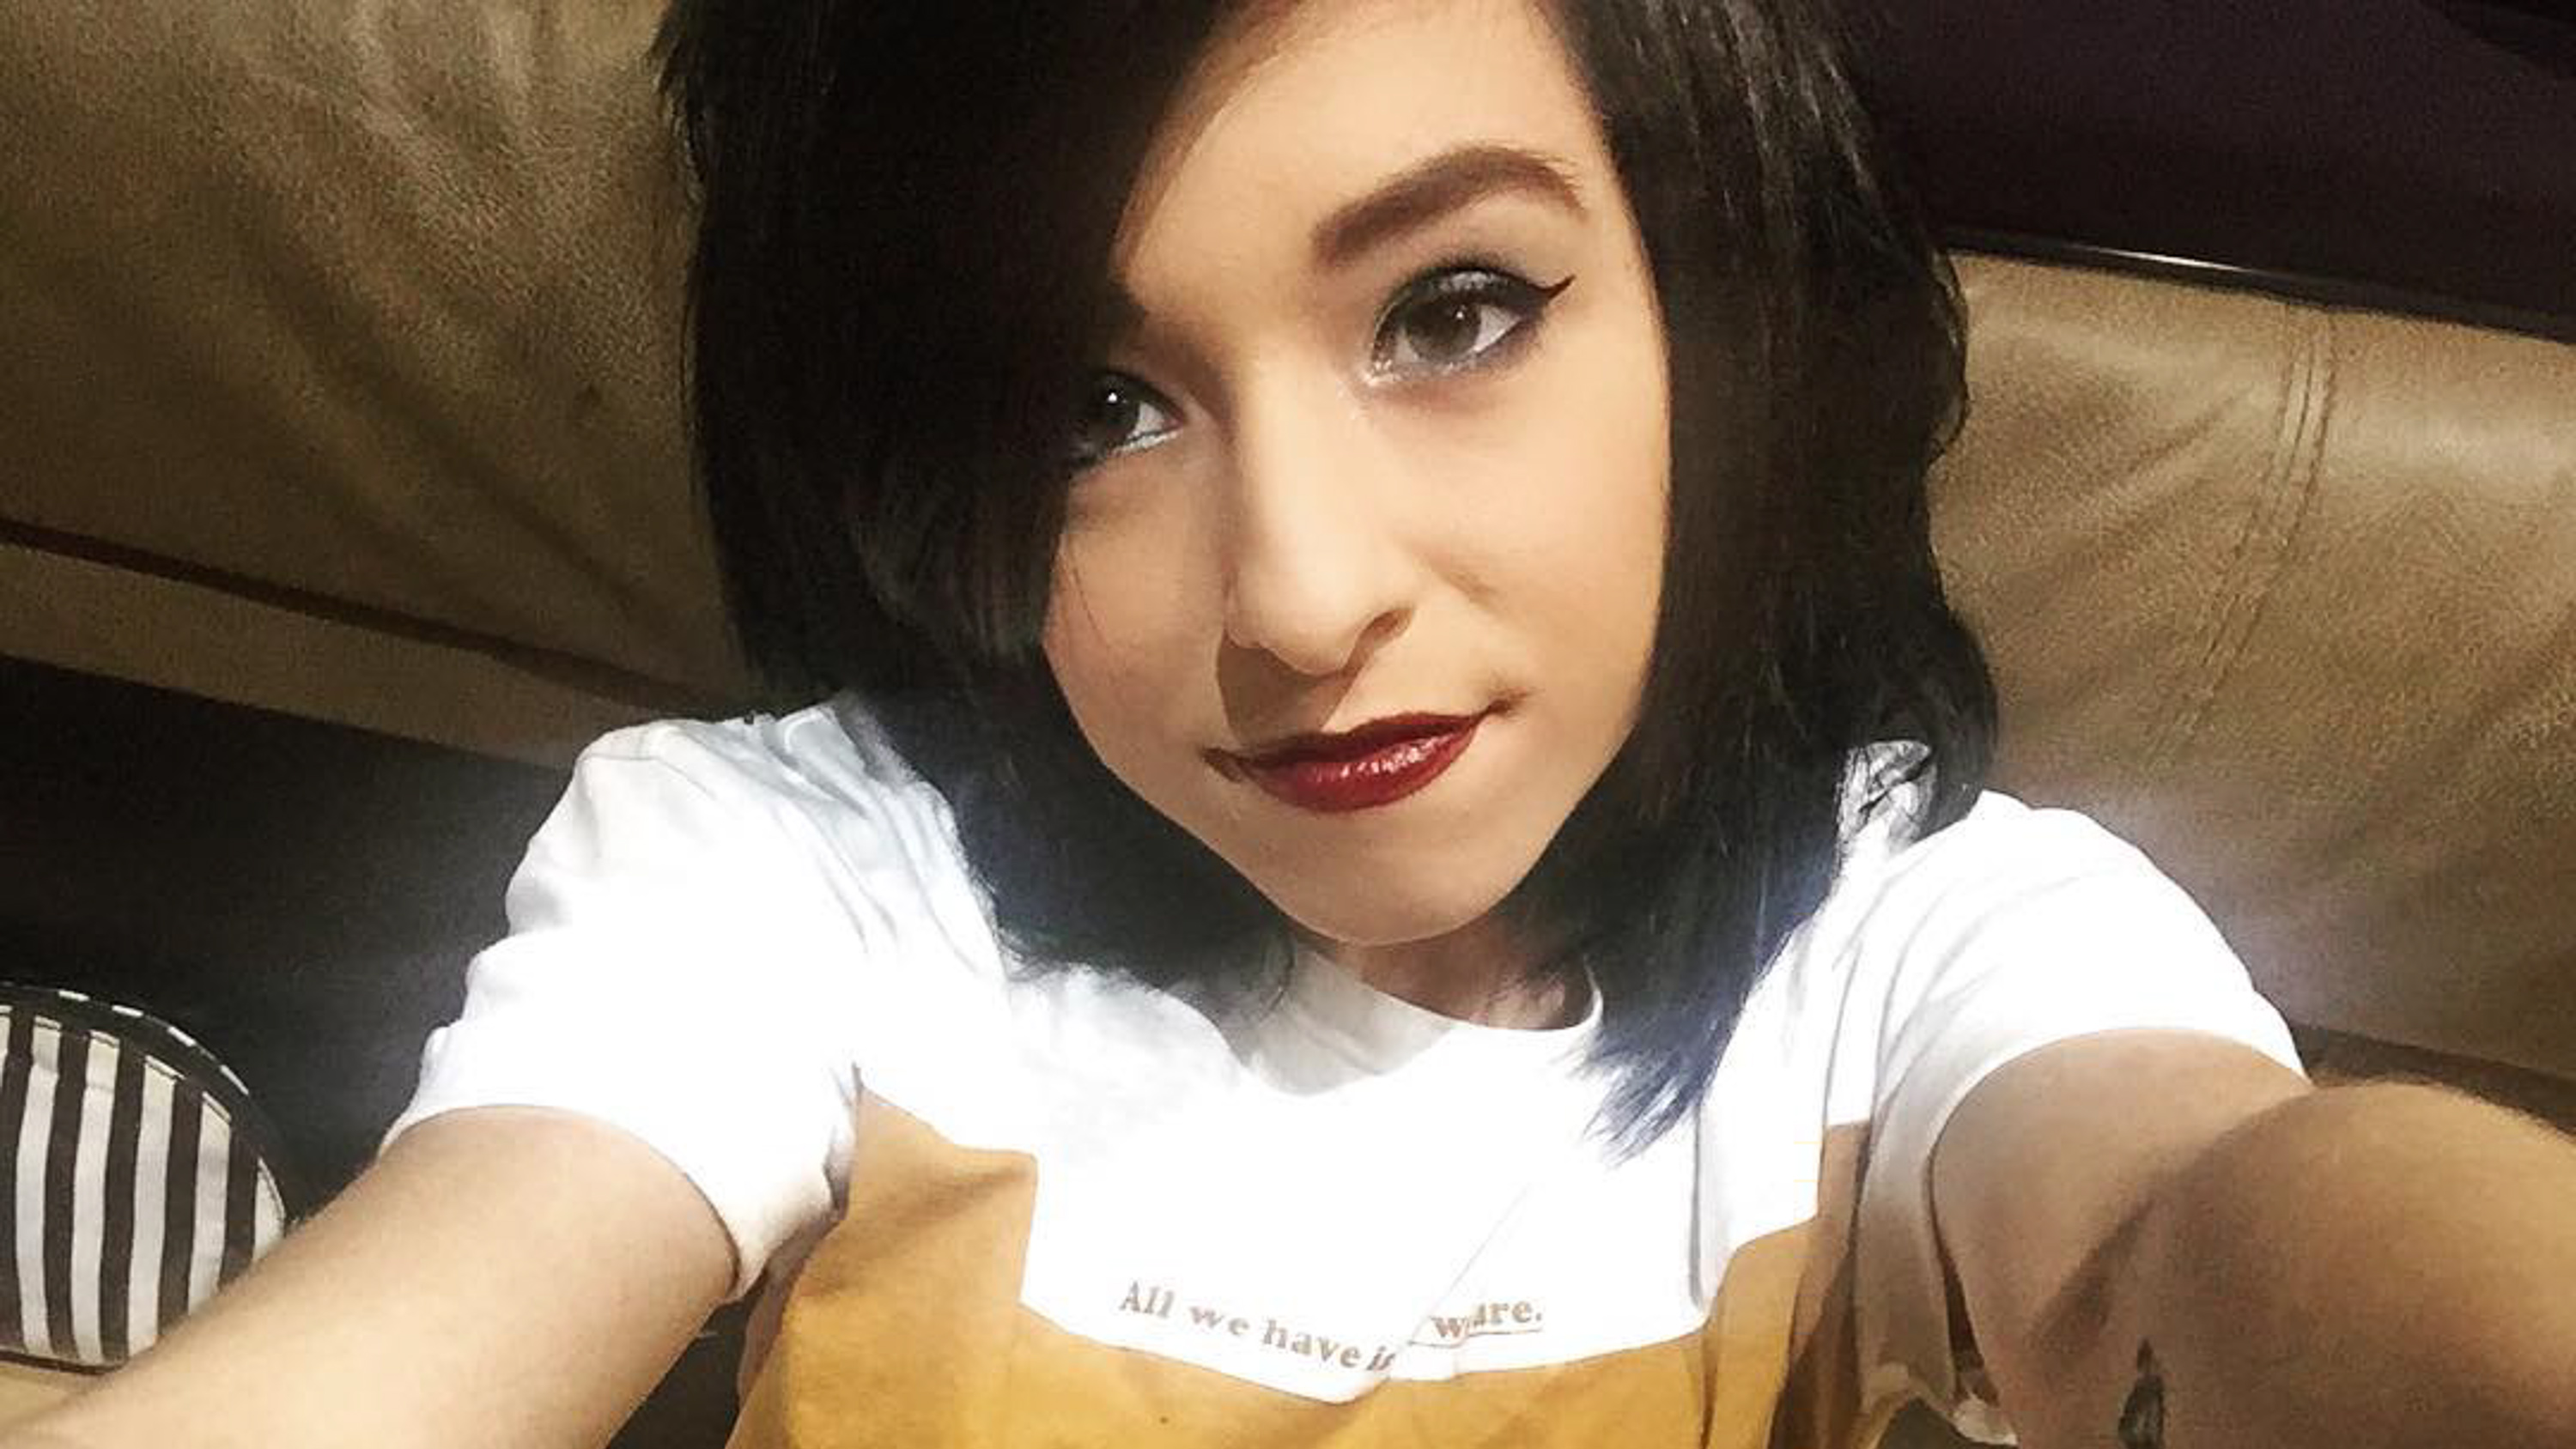 Police: Christina Grimmie Killer at show just to Attack her